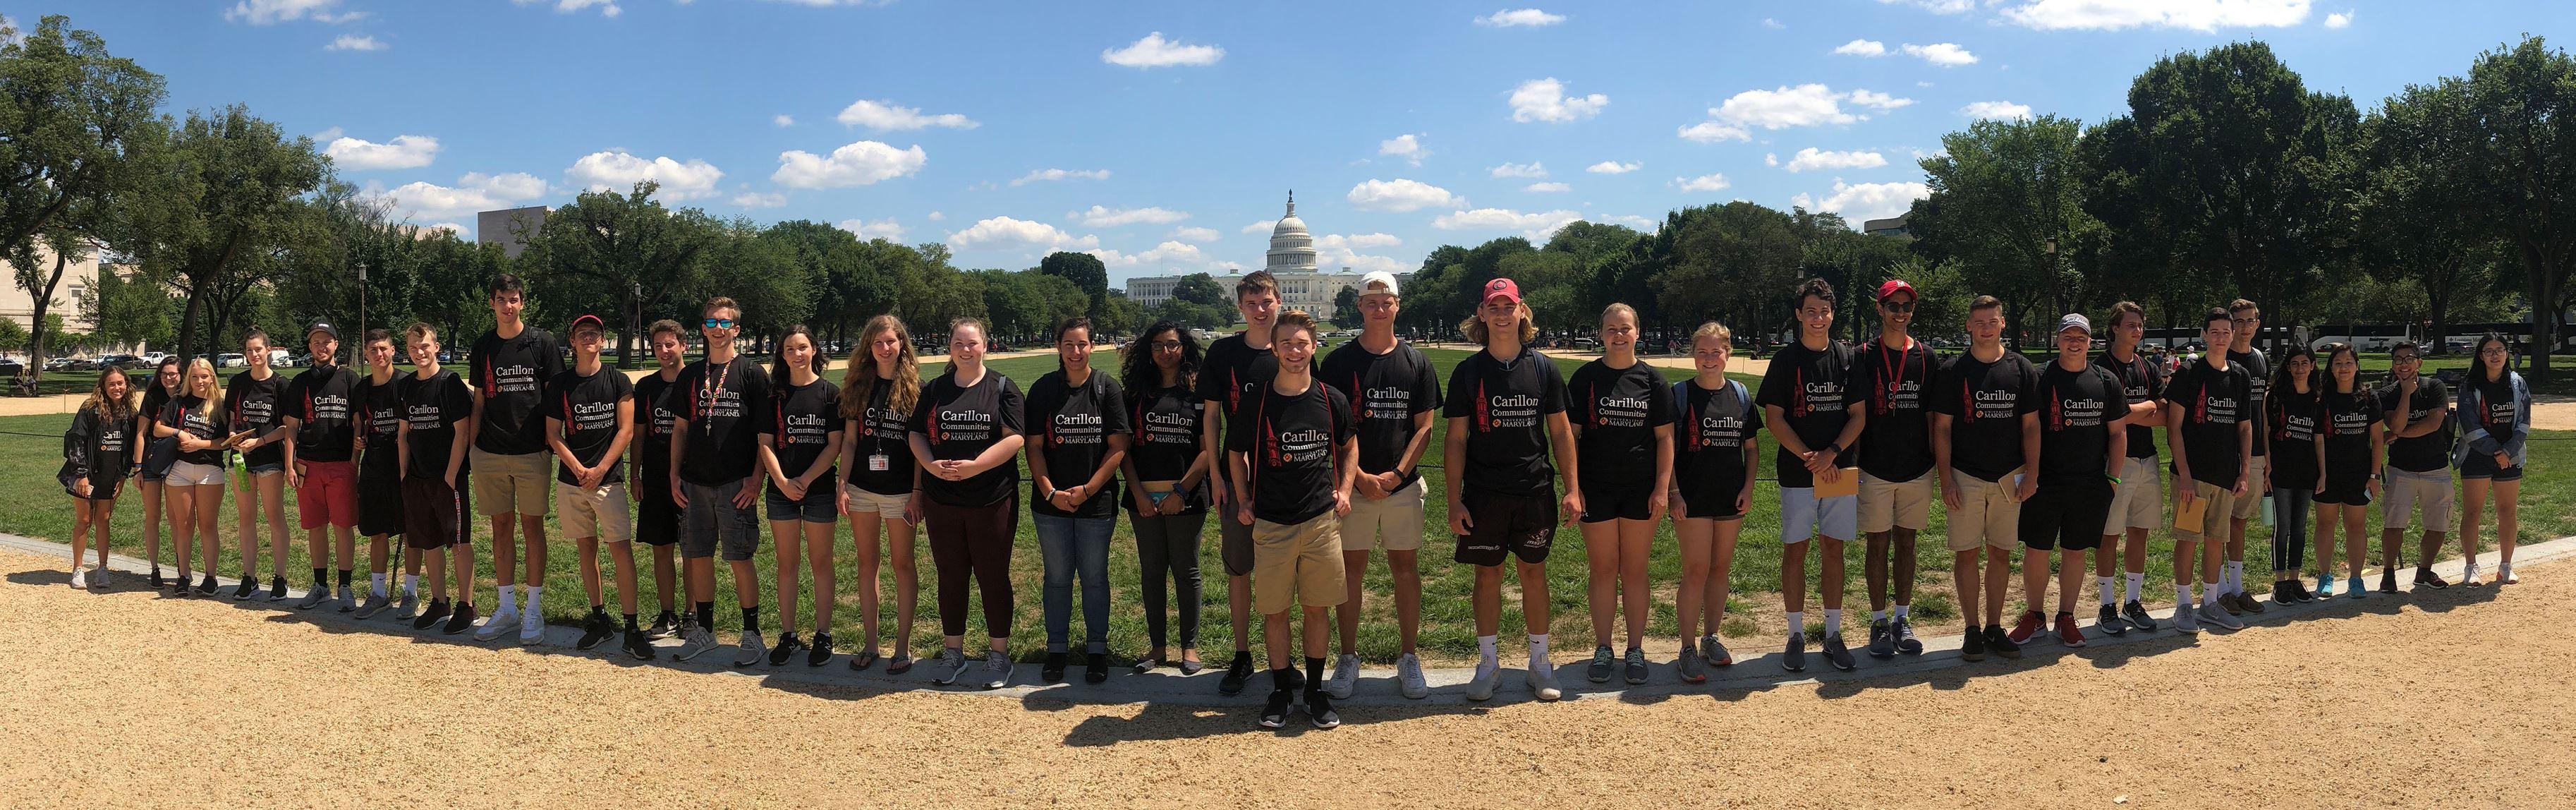 Carillon Students in front of the U.S. Capitol Building in Washington D.C.